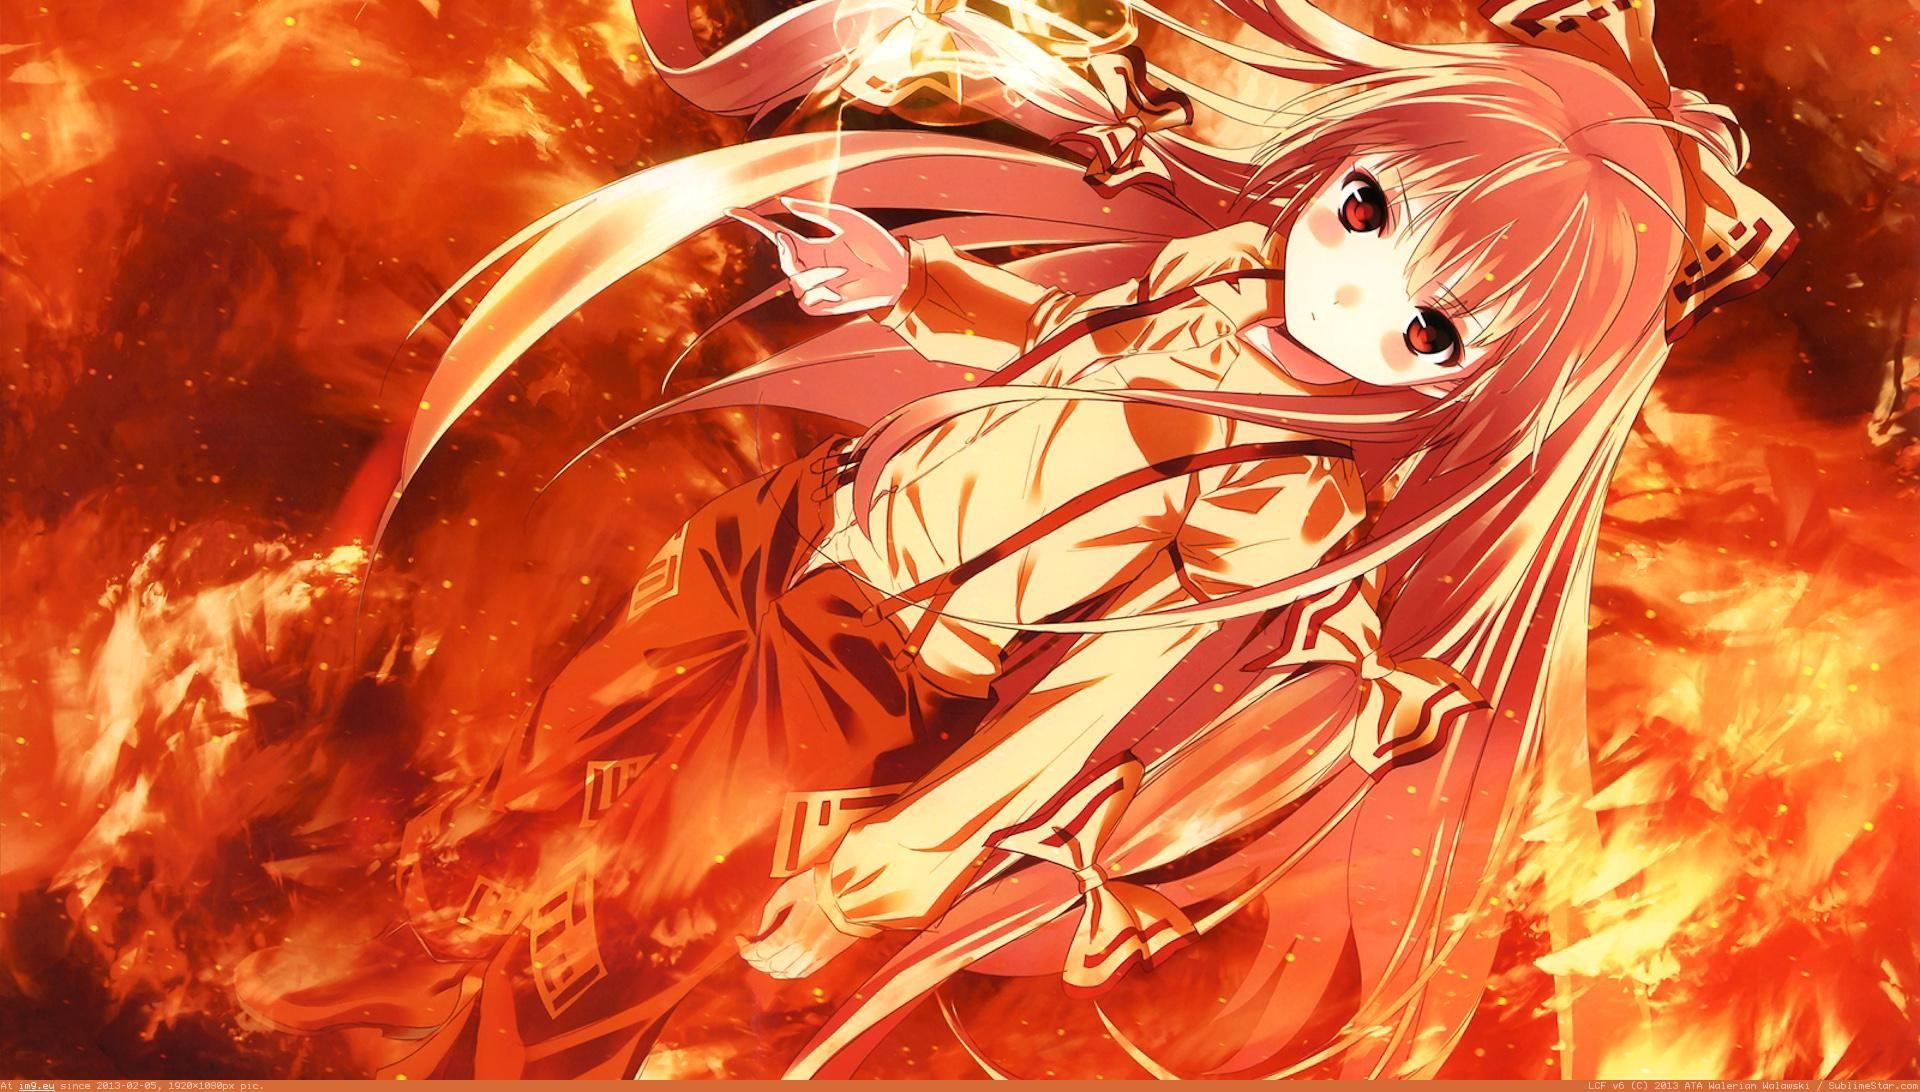 21 Fire Anime Wallpapers for iPhone and Android by Arthur Thomas